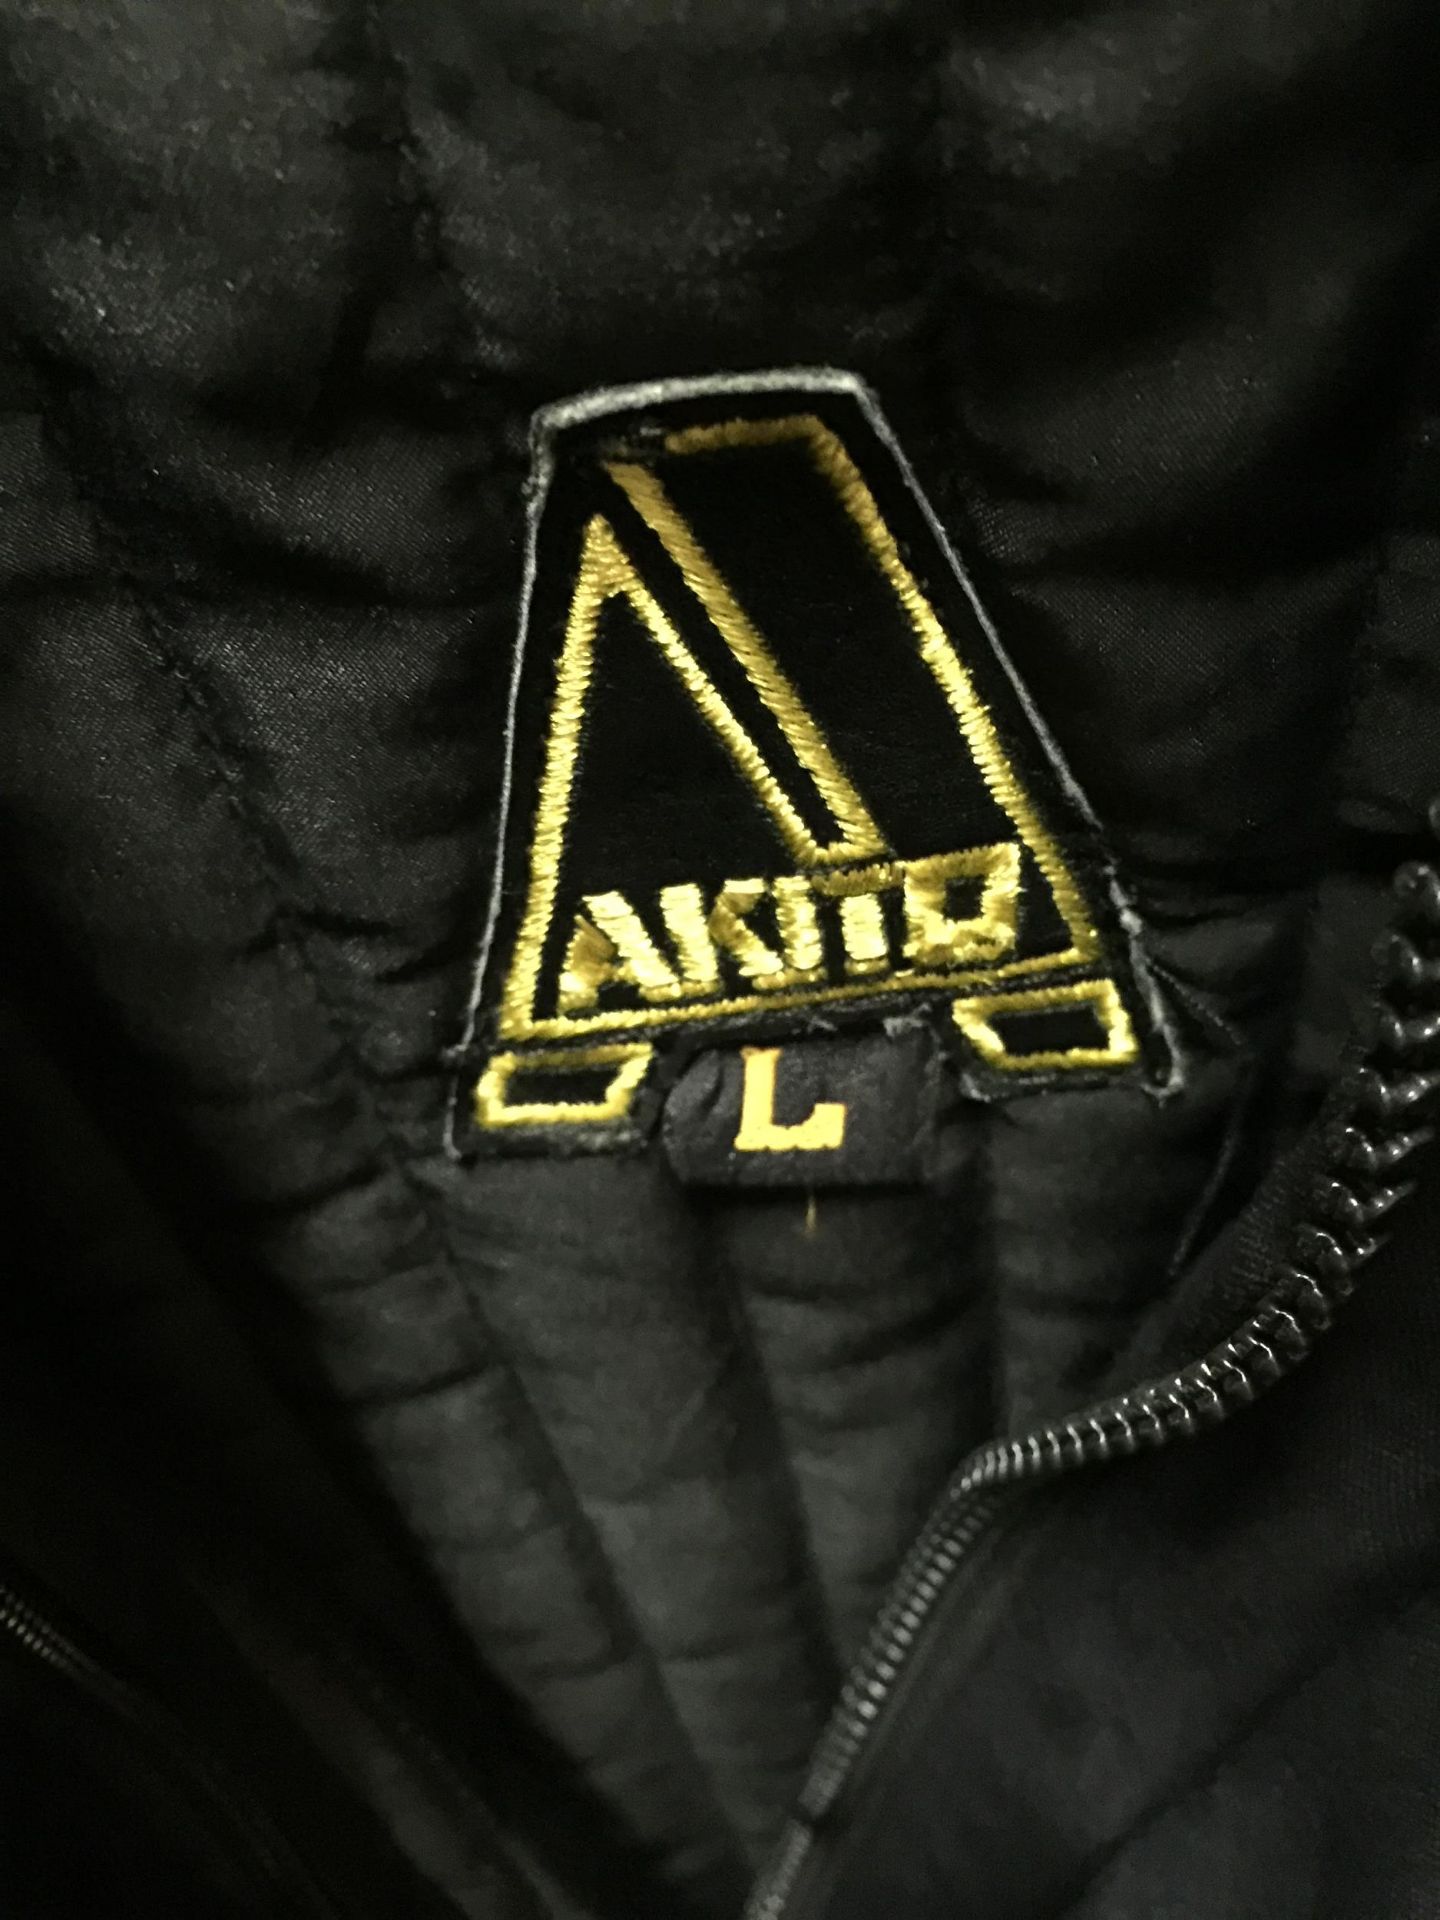 A MOTORCYCLING JACKET SIZE L IN BLACK AND YELLOW - Image 2 of 4